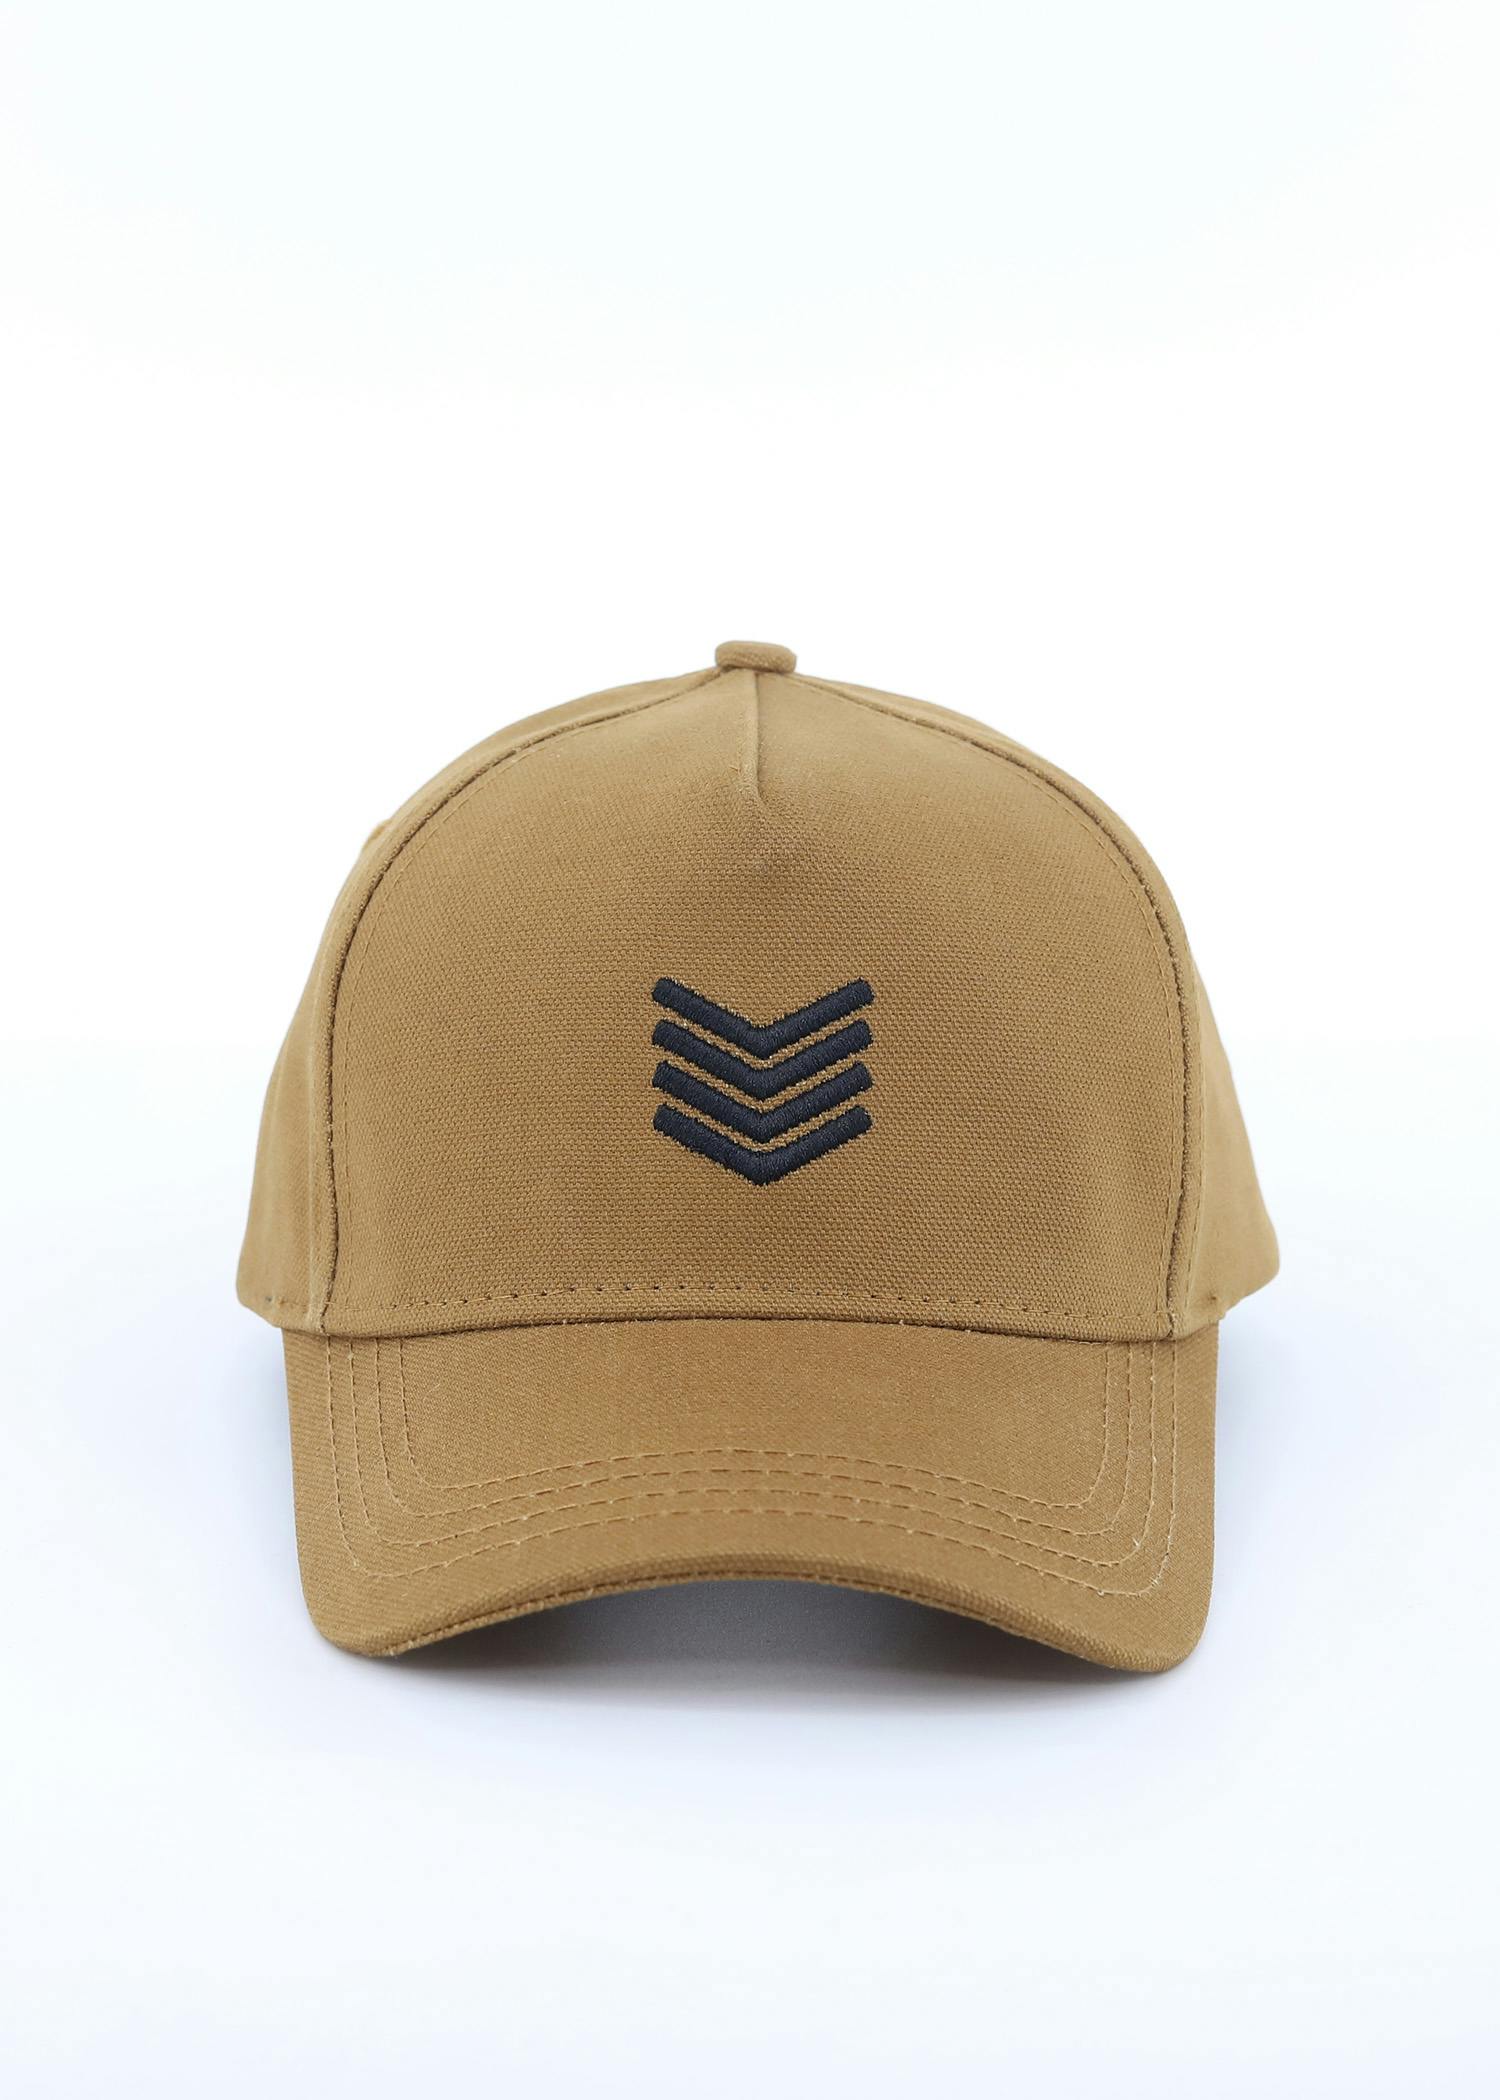 rooster visor cap brown color front view